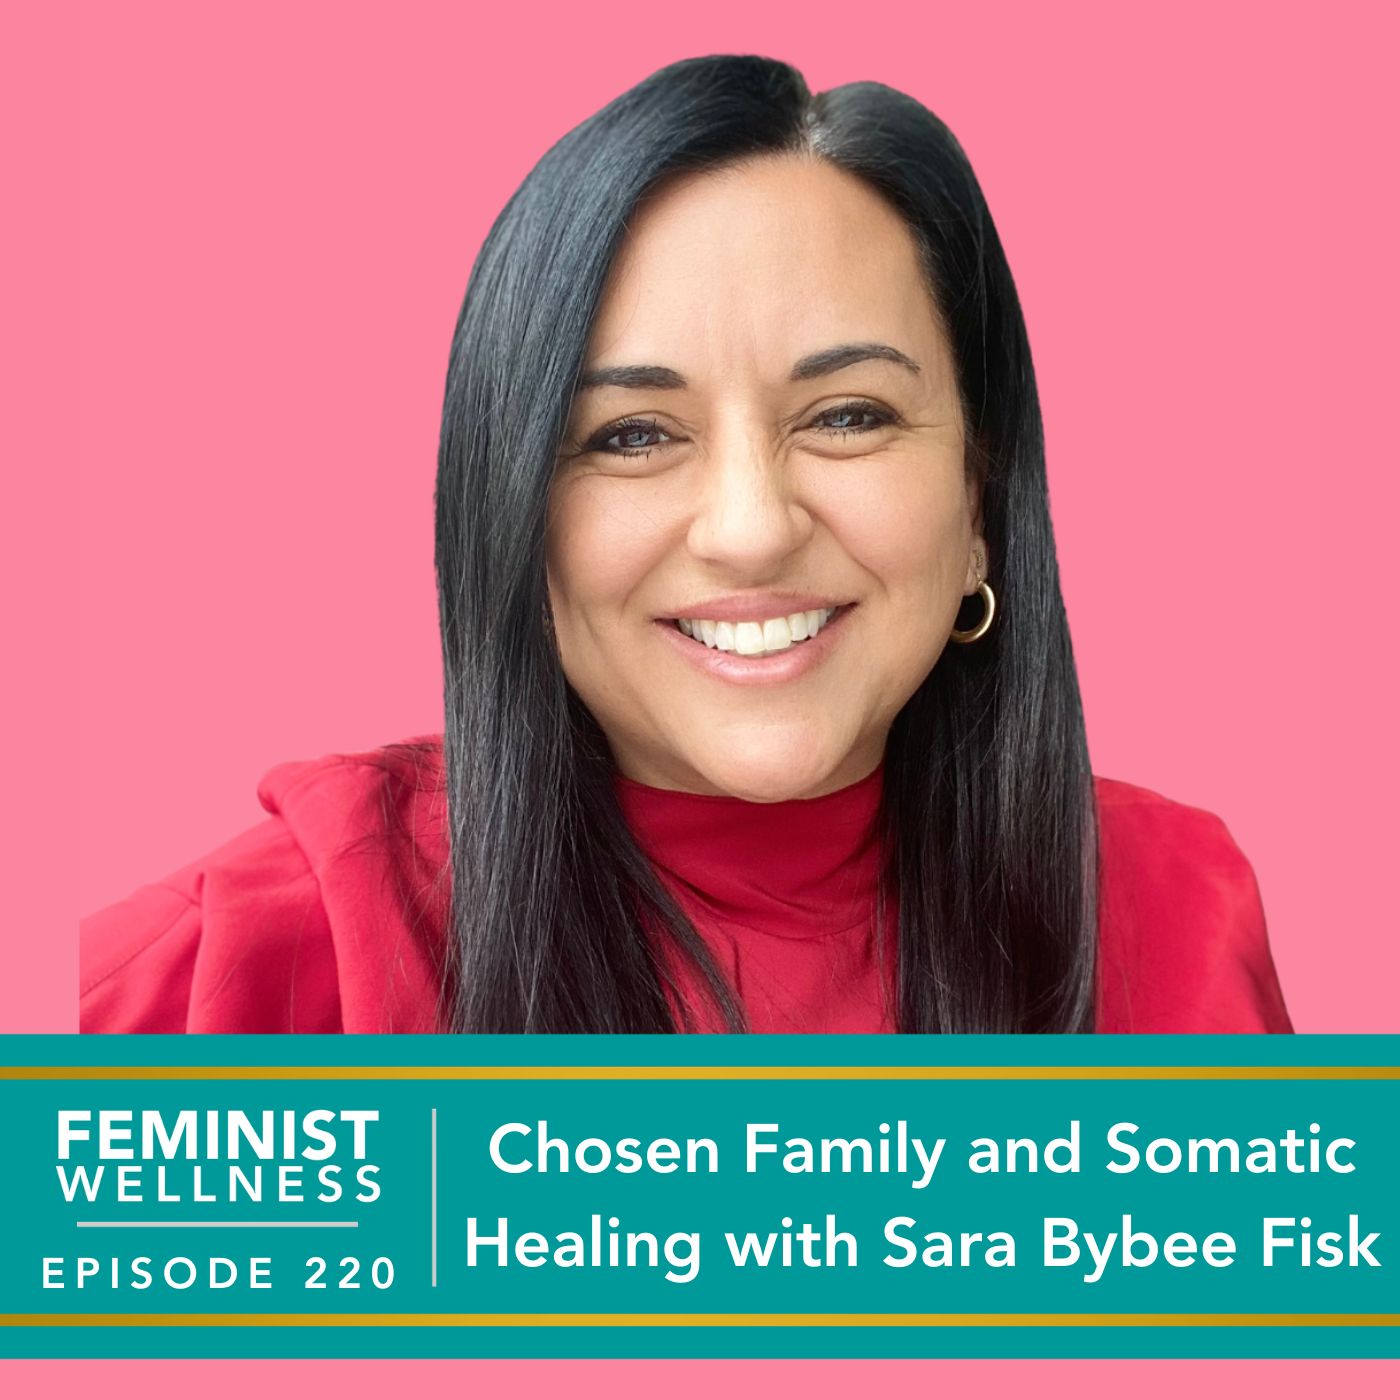 Feminist Wellness with Victoria Albina | Chosen Family and Somatic Healing with Sara Bybee Fisk